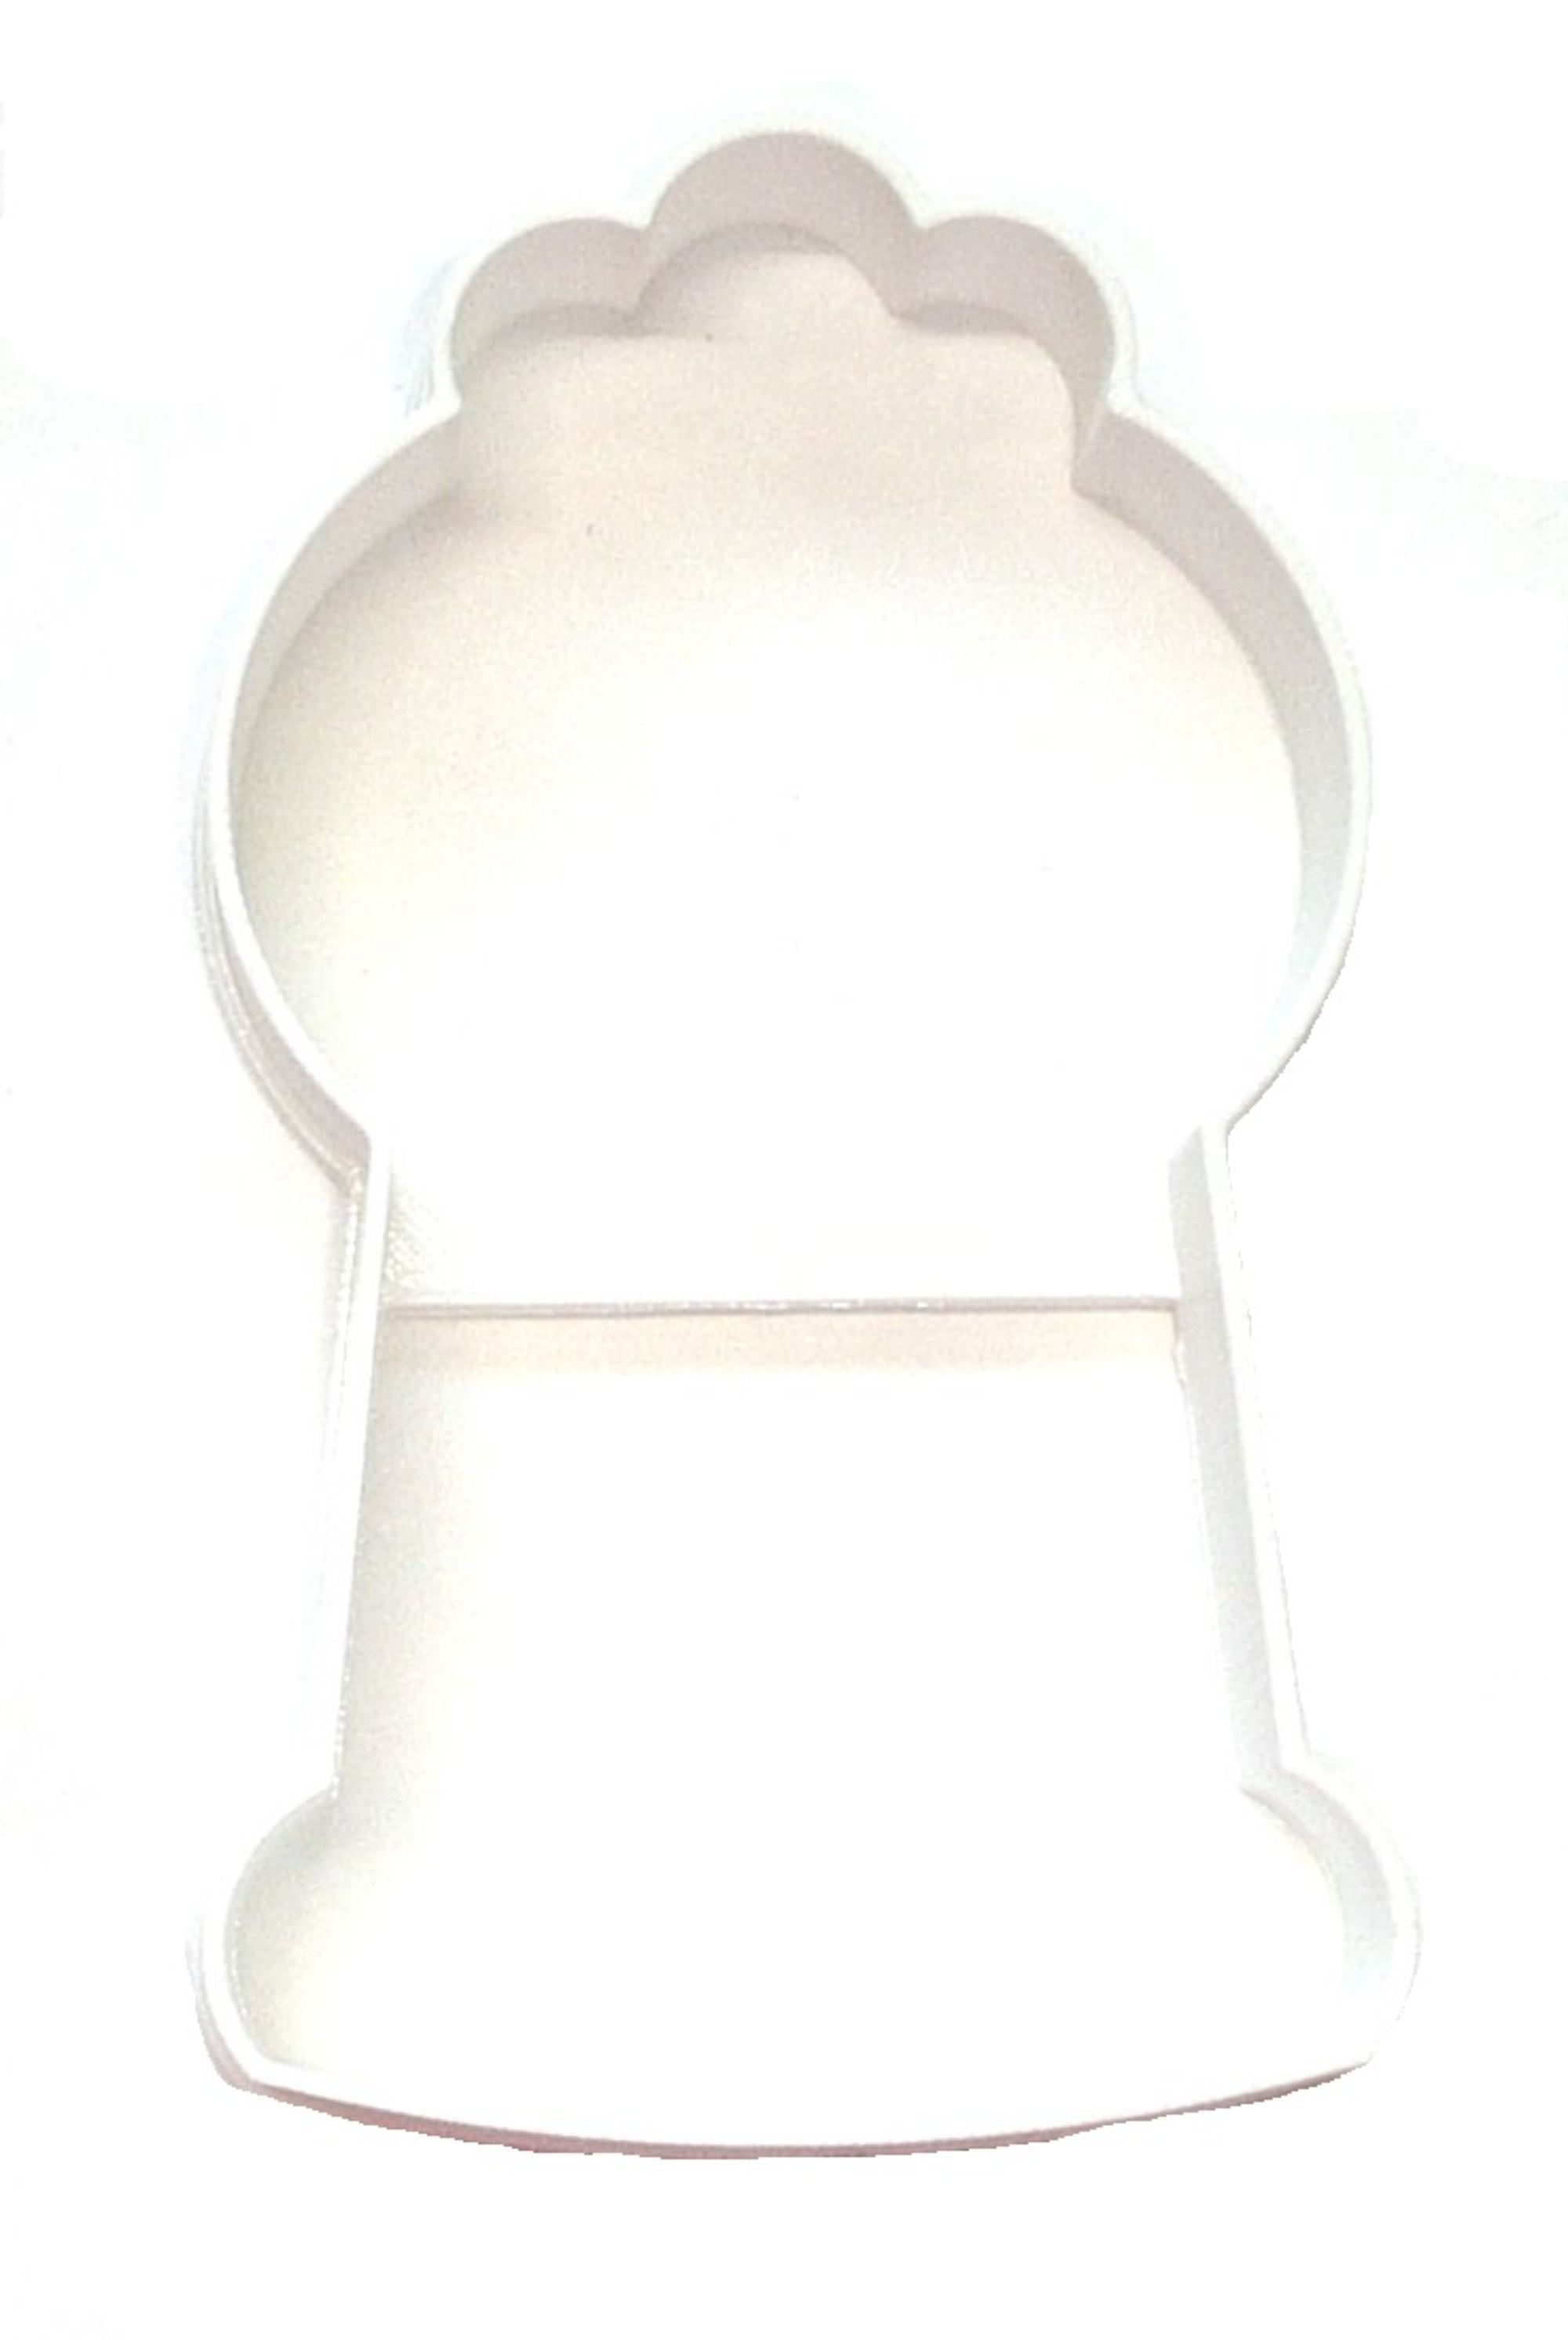 Bubble Wand Cookie Cutter/multi-size/dishwasher Safe Available 